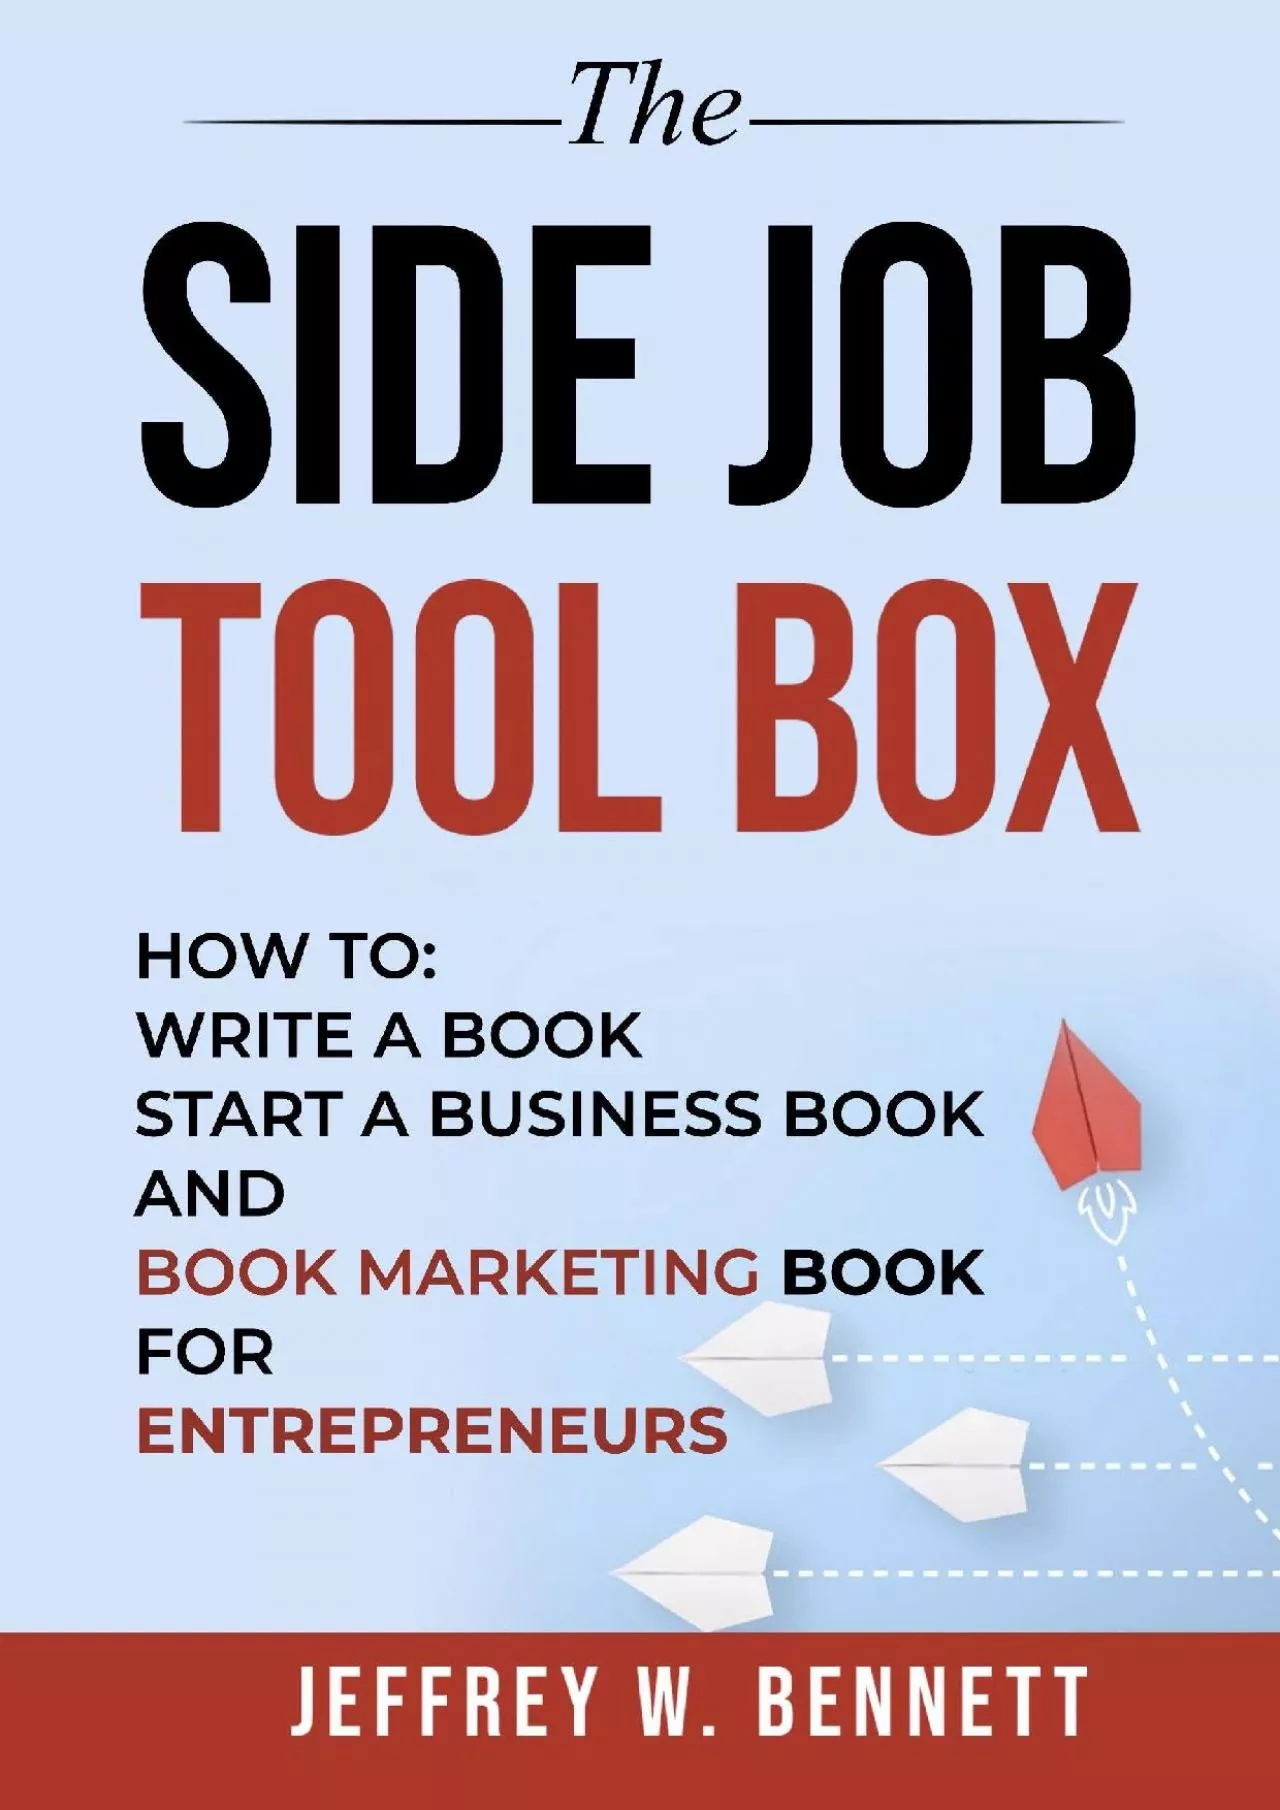 THE SIDE JOB TOOL BOX How to Write a Book Start a Business Book and Book Marketing Book